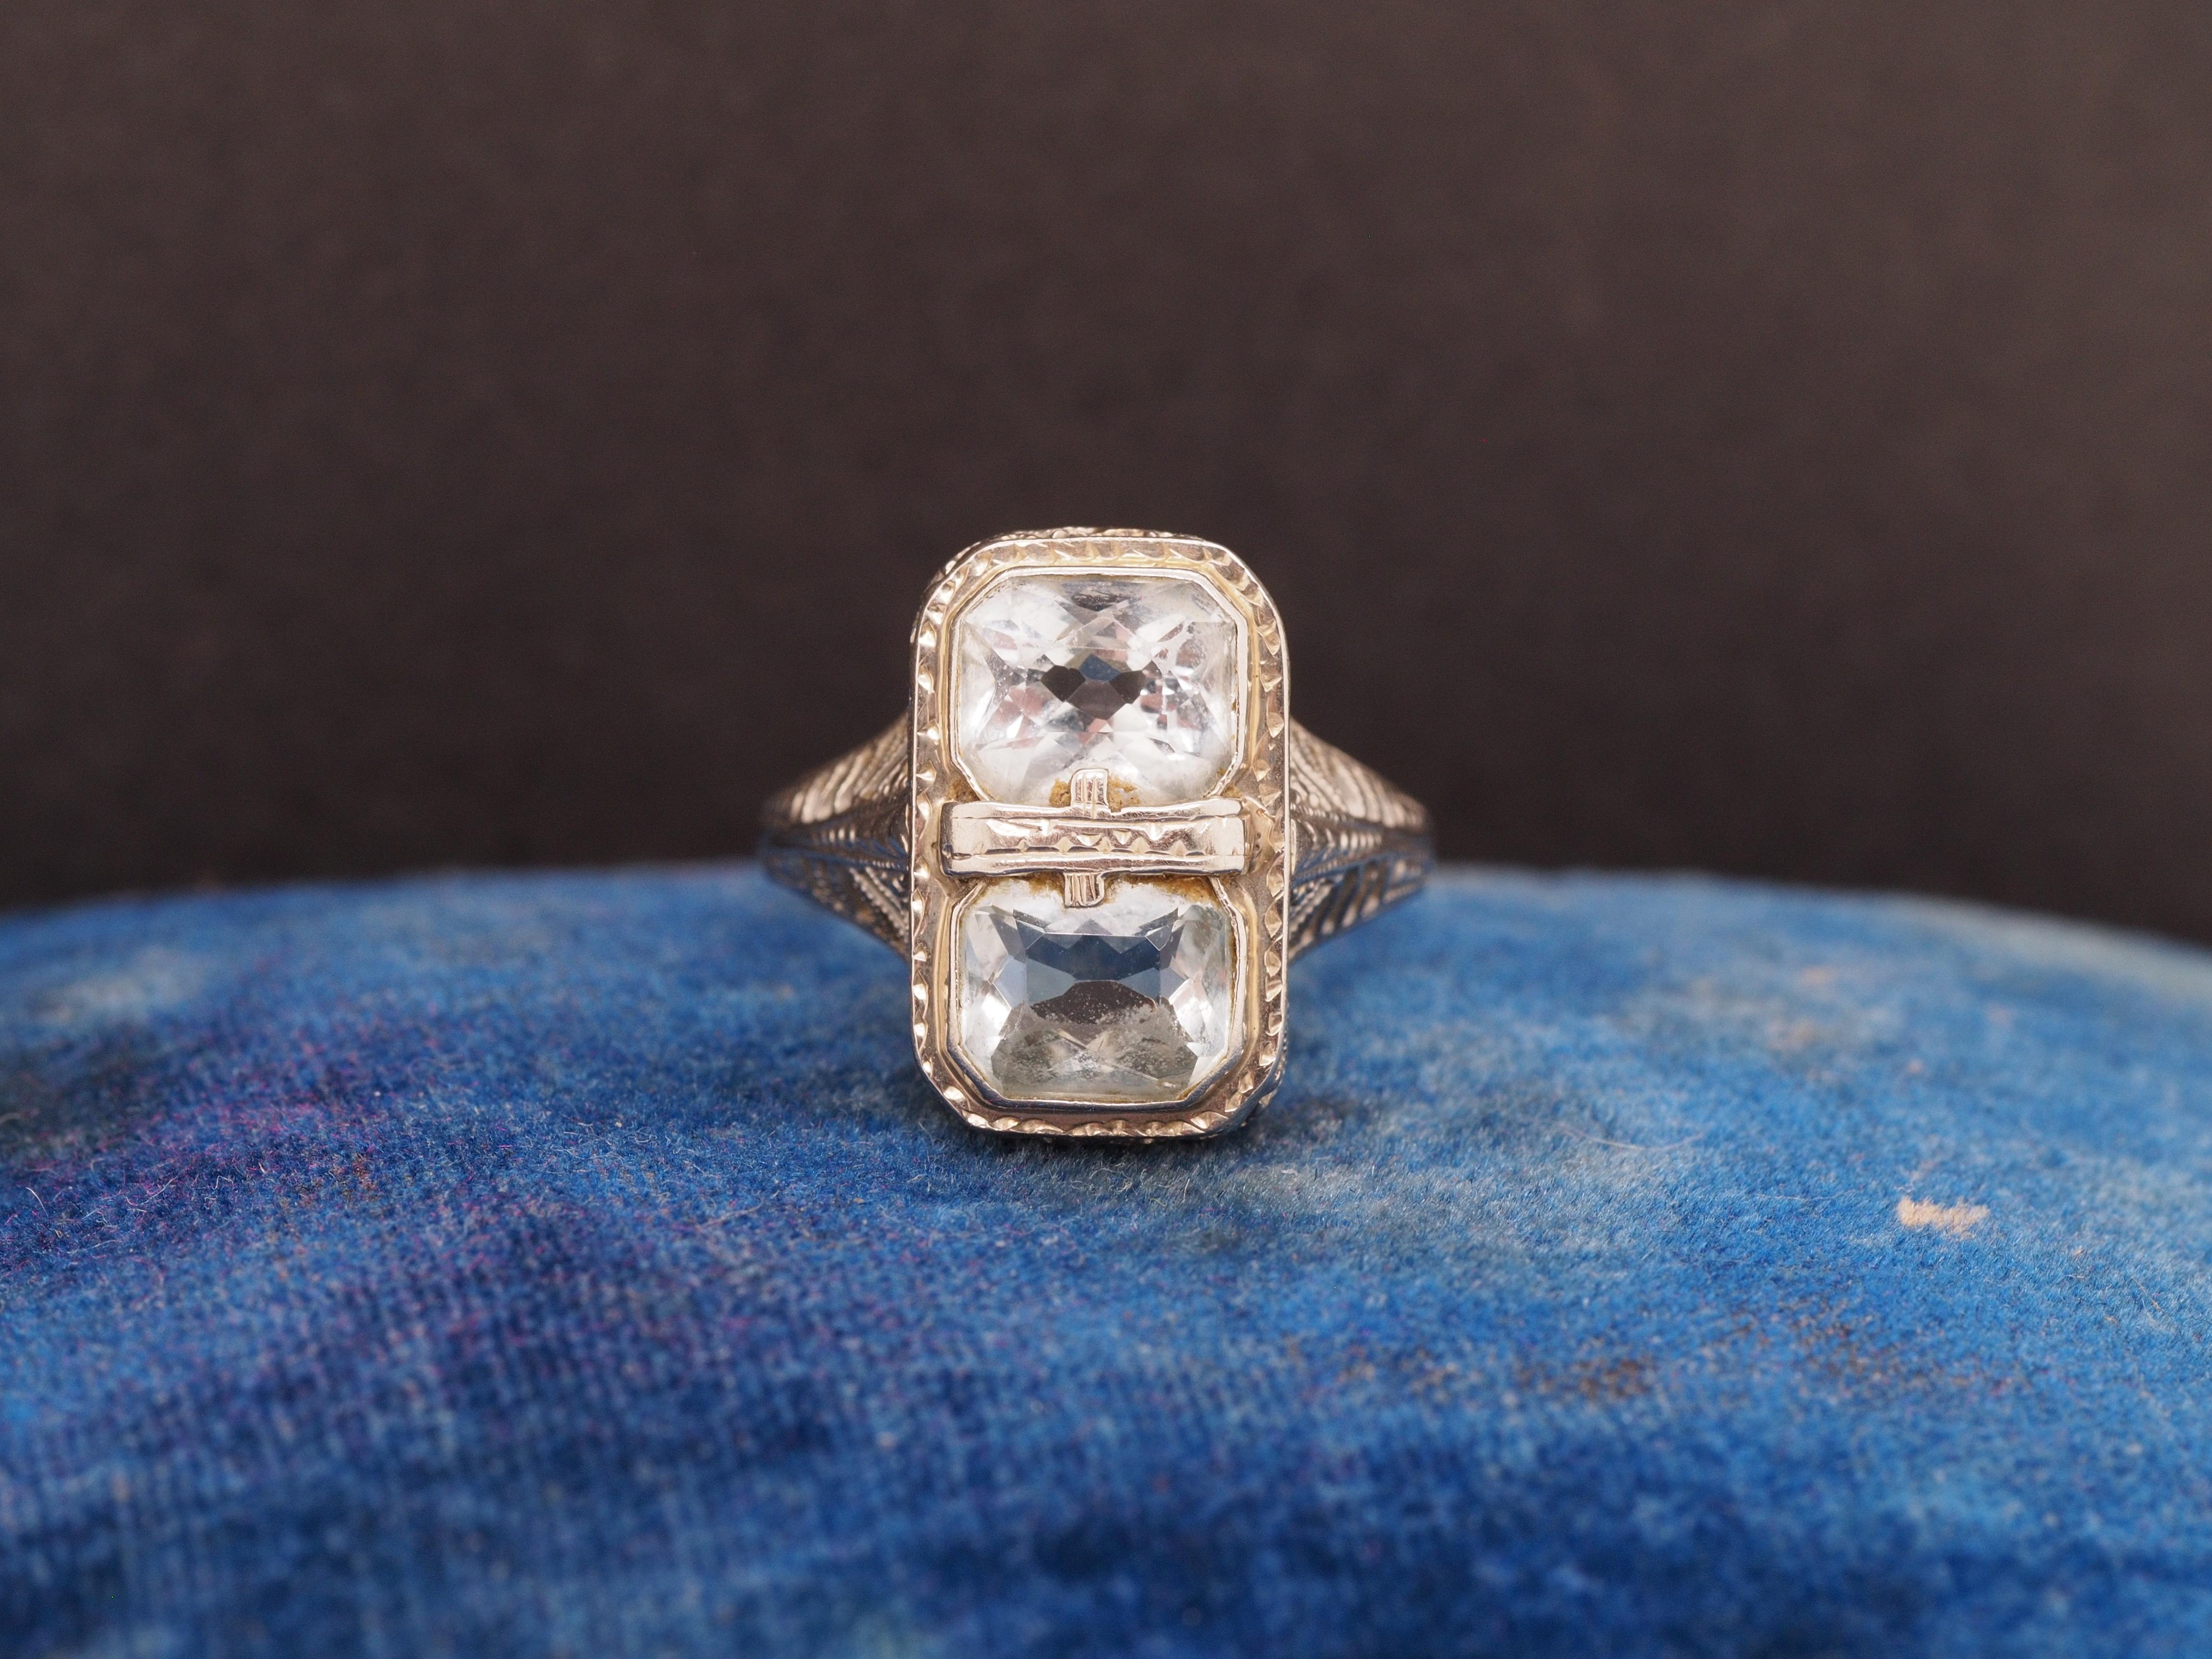 Year: 1930s
Item Details:
Ring Size: 6.5
Metal Type: 18K White Gold [Hallmarked, and Tested]
Weight: 3.2 grams
Aquamarine Details: 2 Aquamarines, Natural, Light Blue, Rectangular Cut
Band Width: 2mm
Condition: Excellent
Price: 850
‌
This ring can be